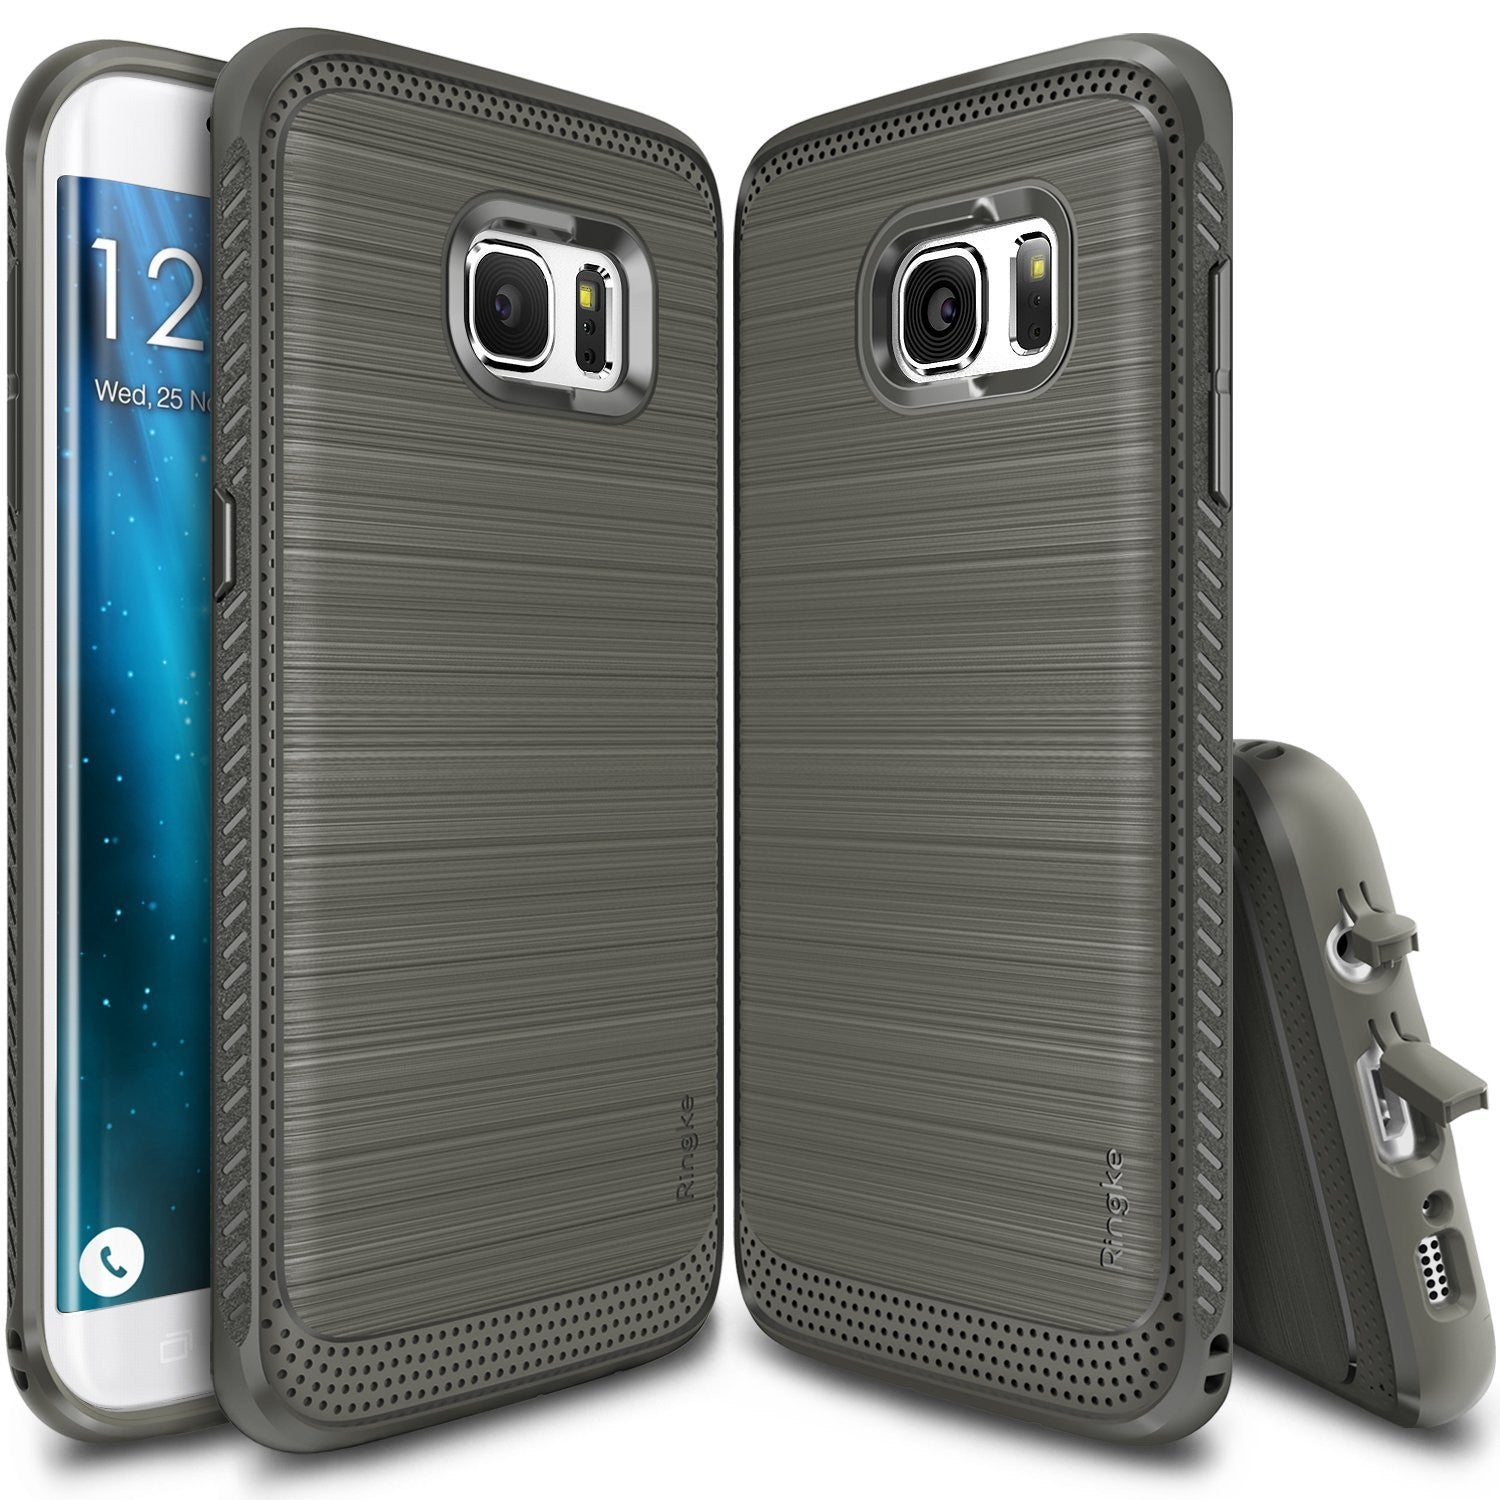 ringke onyx rugged flexible tpu shockproof cover case for galaxy s7 edge mist gray